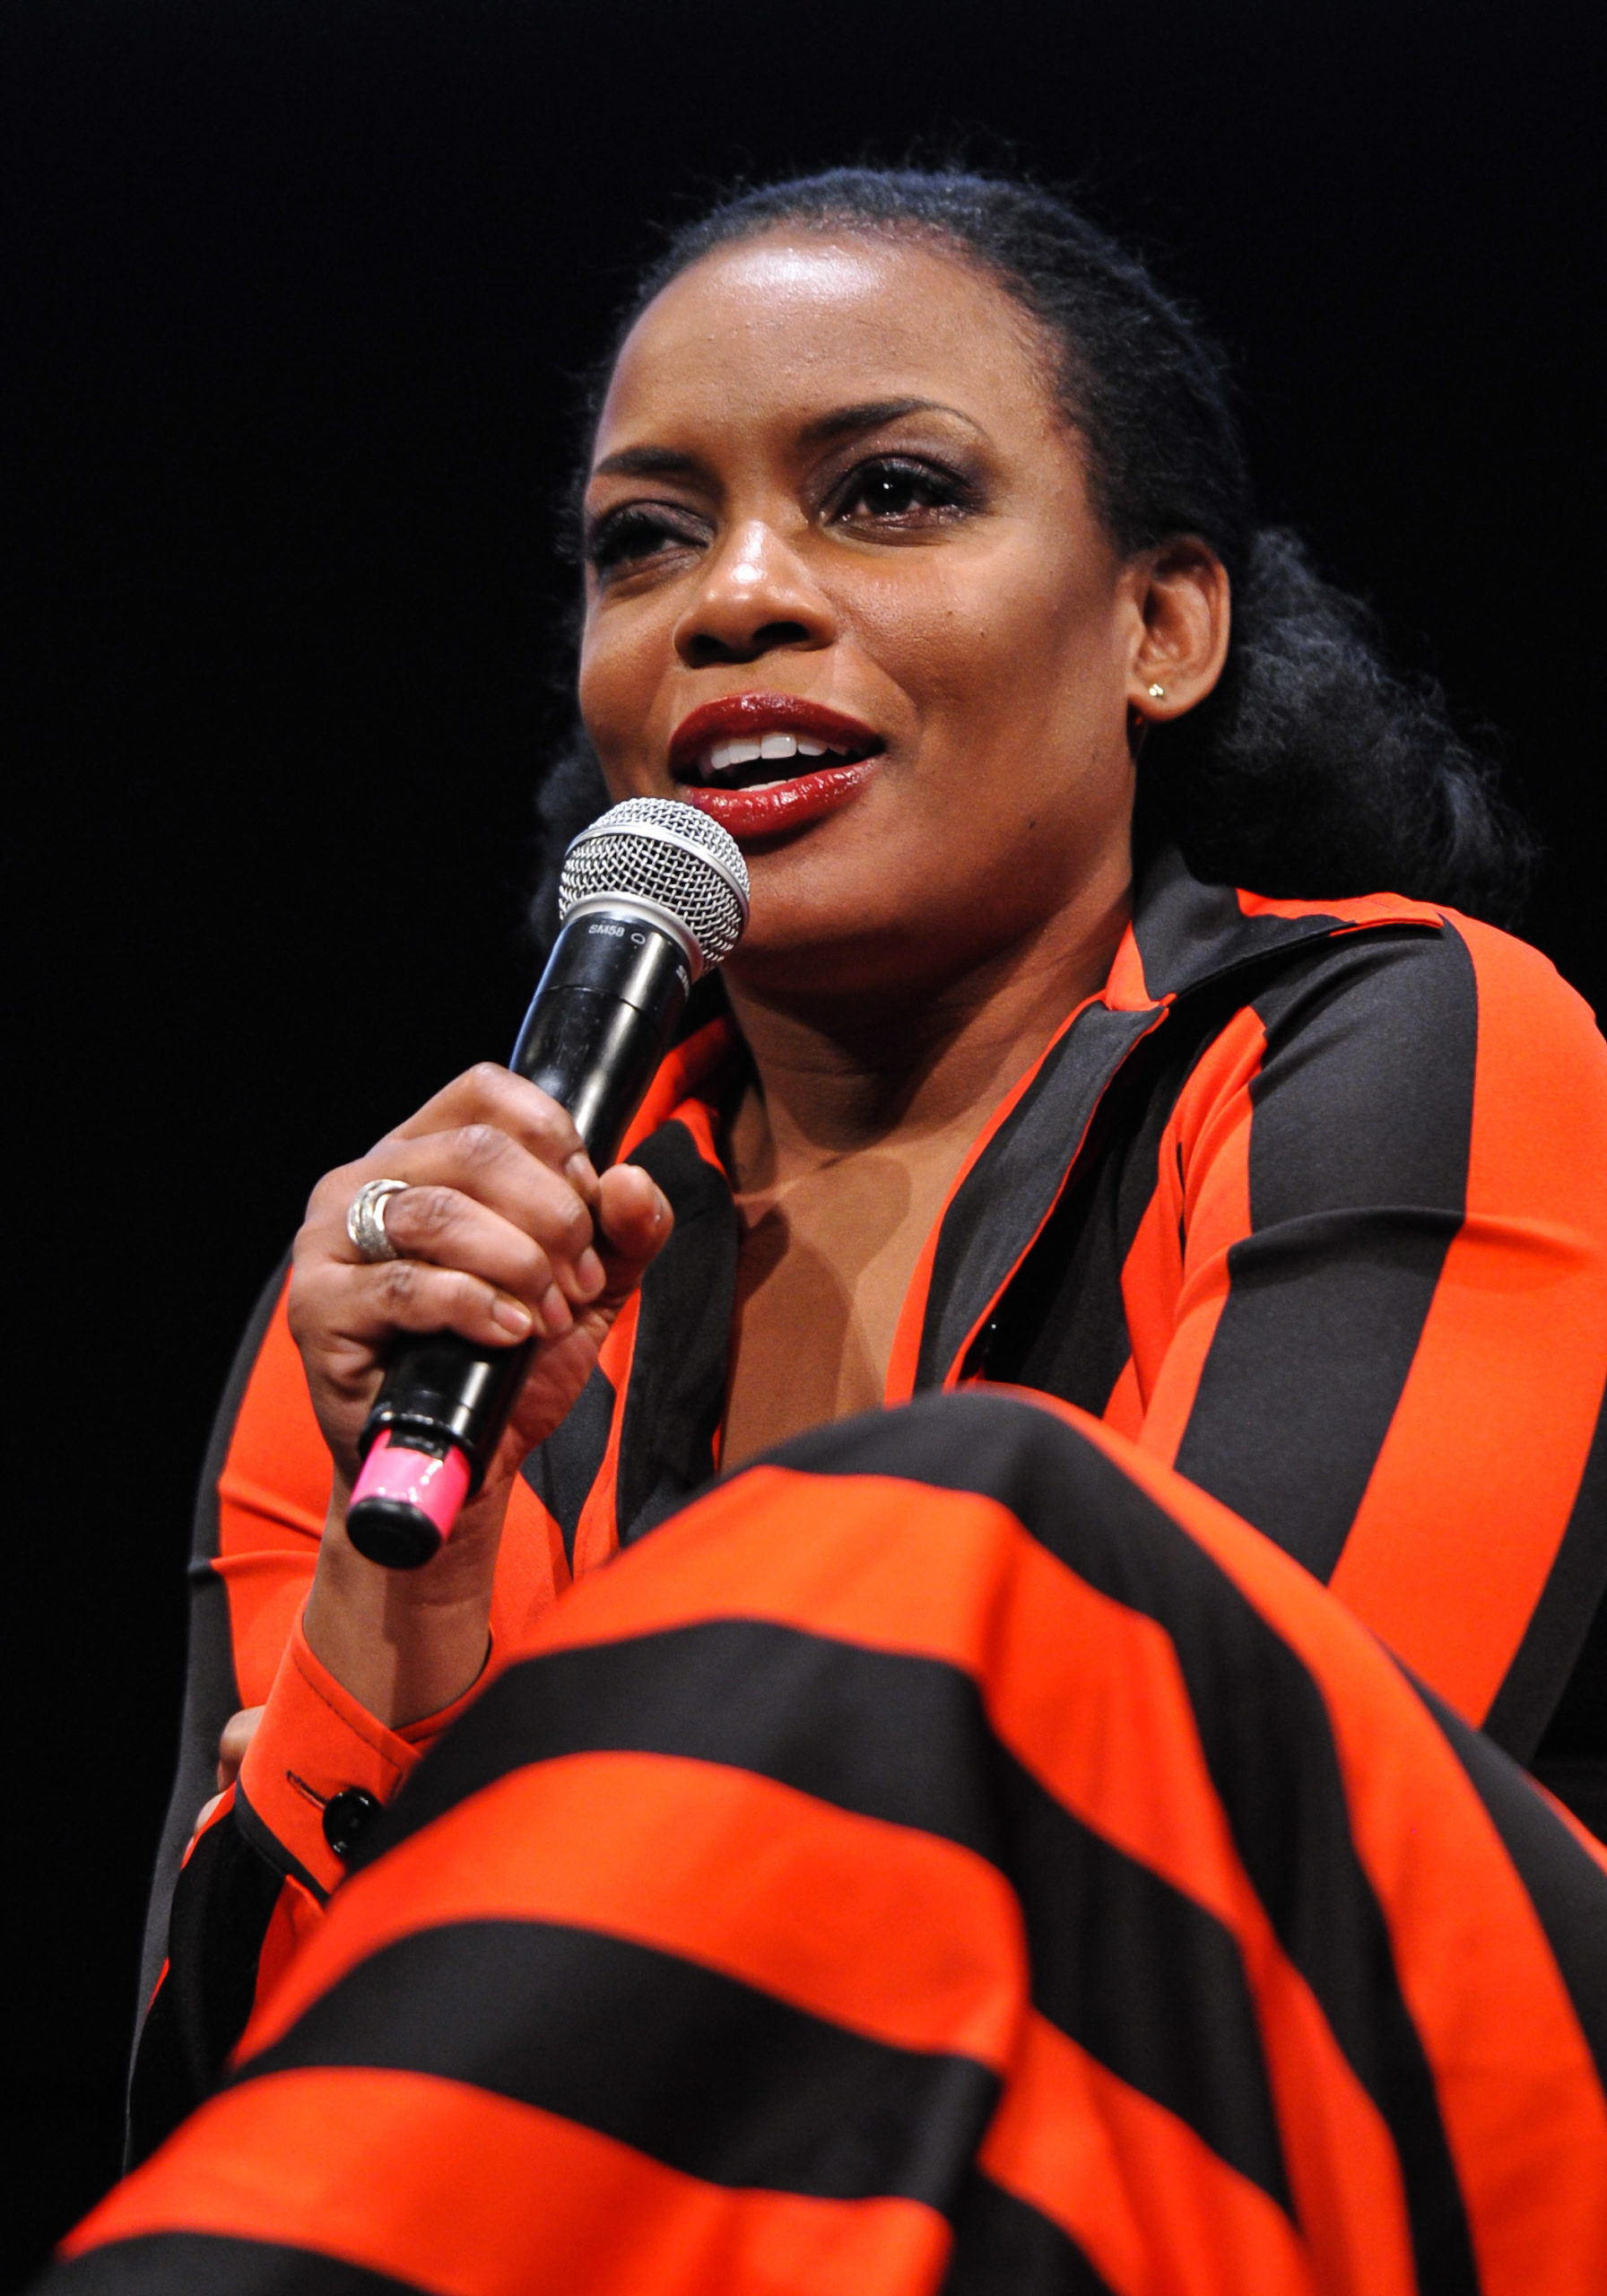 Aunjanue Ellis is a black woman in a striking striped gown, speaking into a microphone while sitting onstage